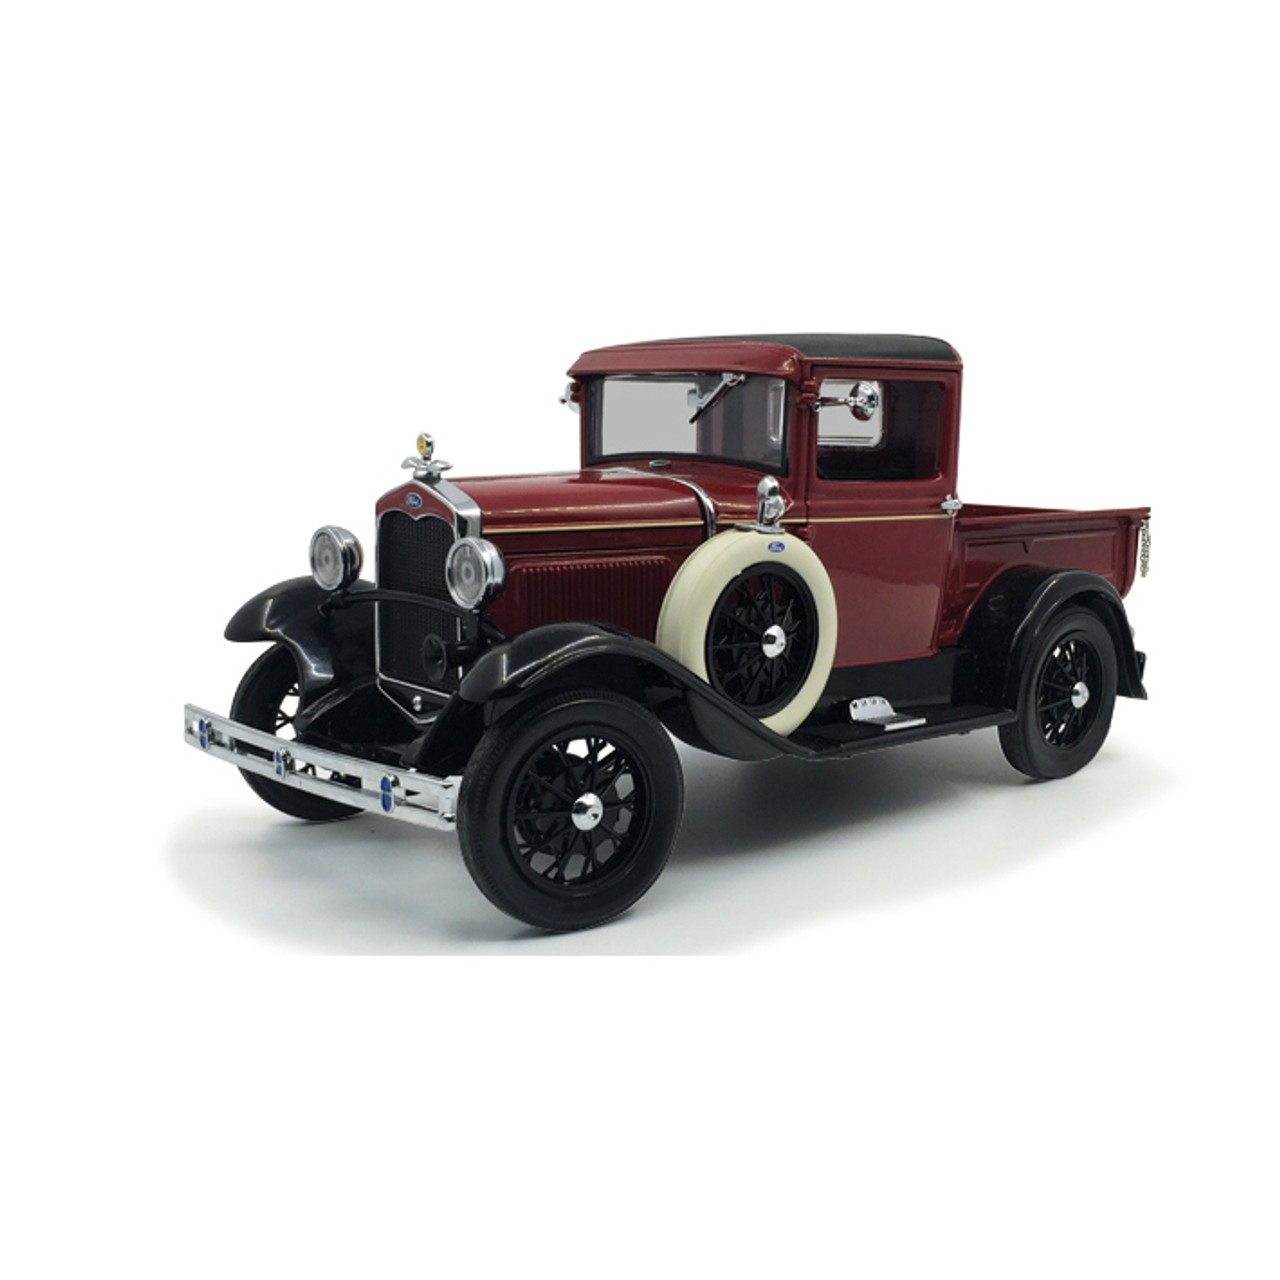 1931 Ford Model A Pickup - red 1:18 Scale Diecast Replica Model by Sunstar